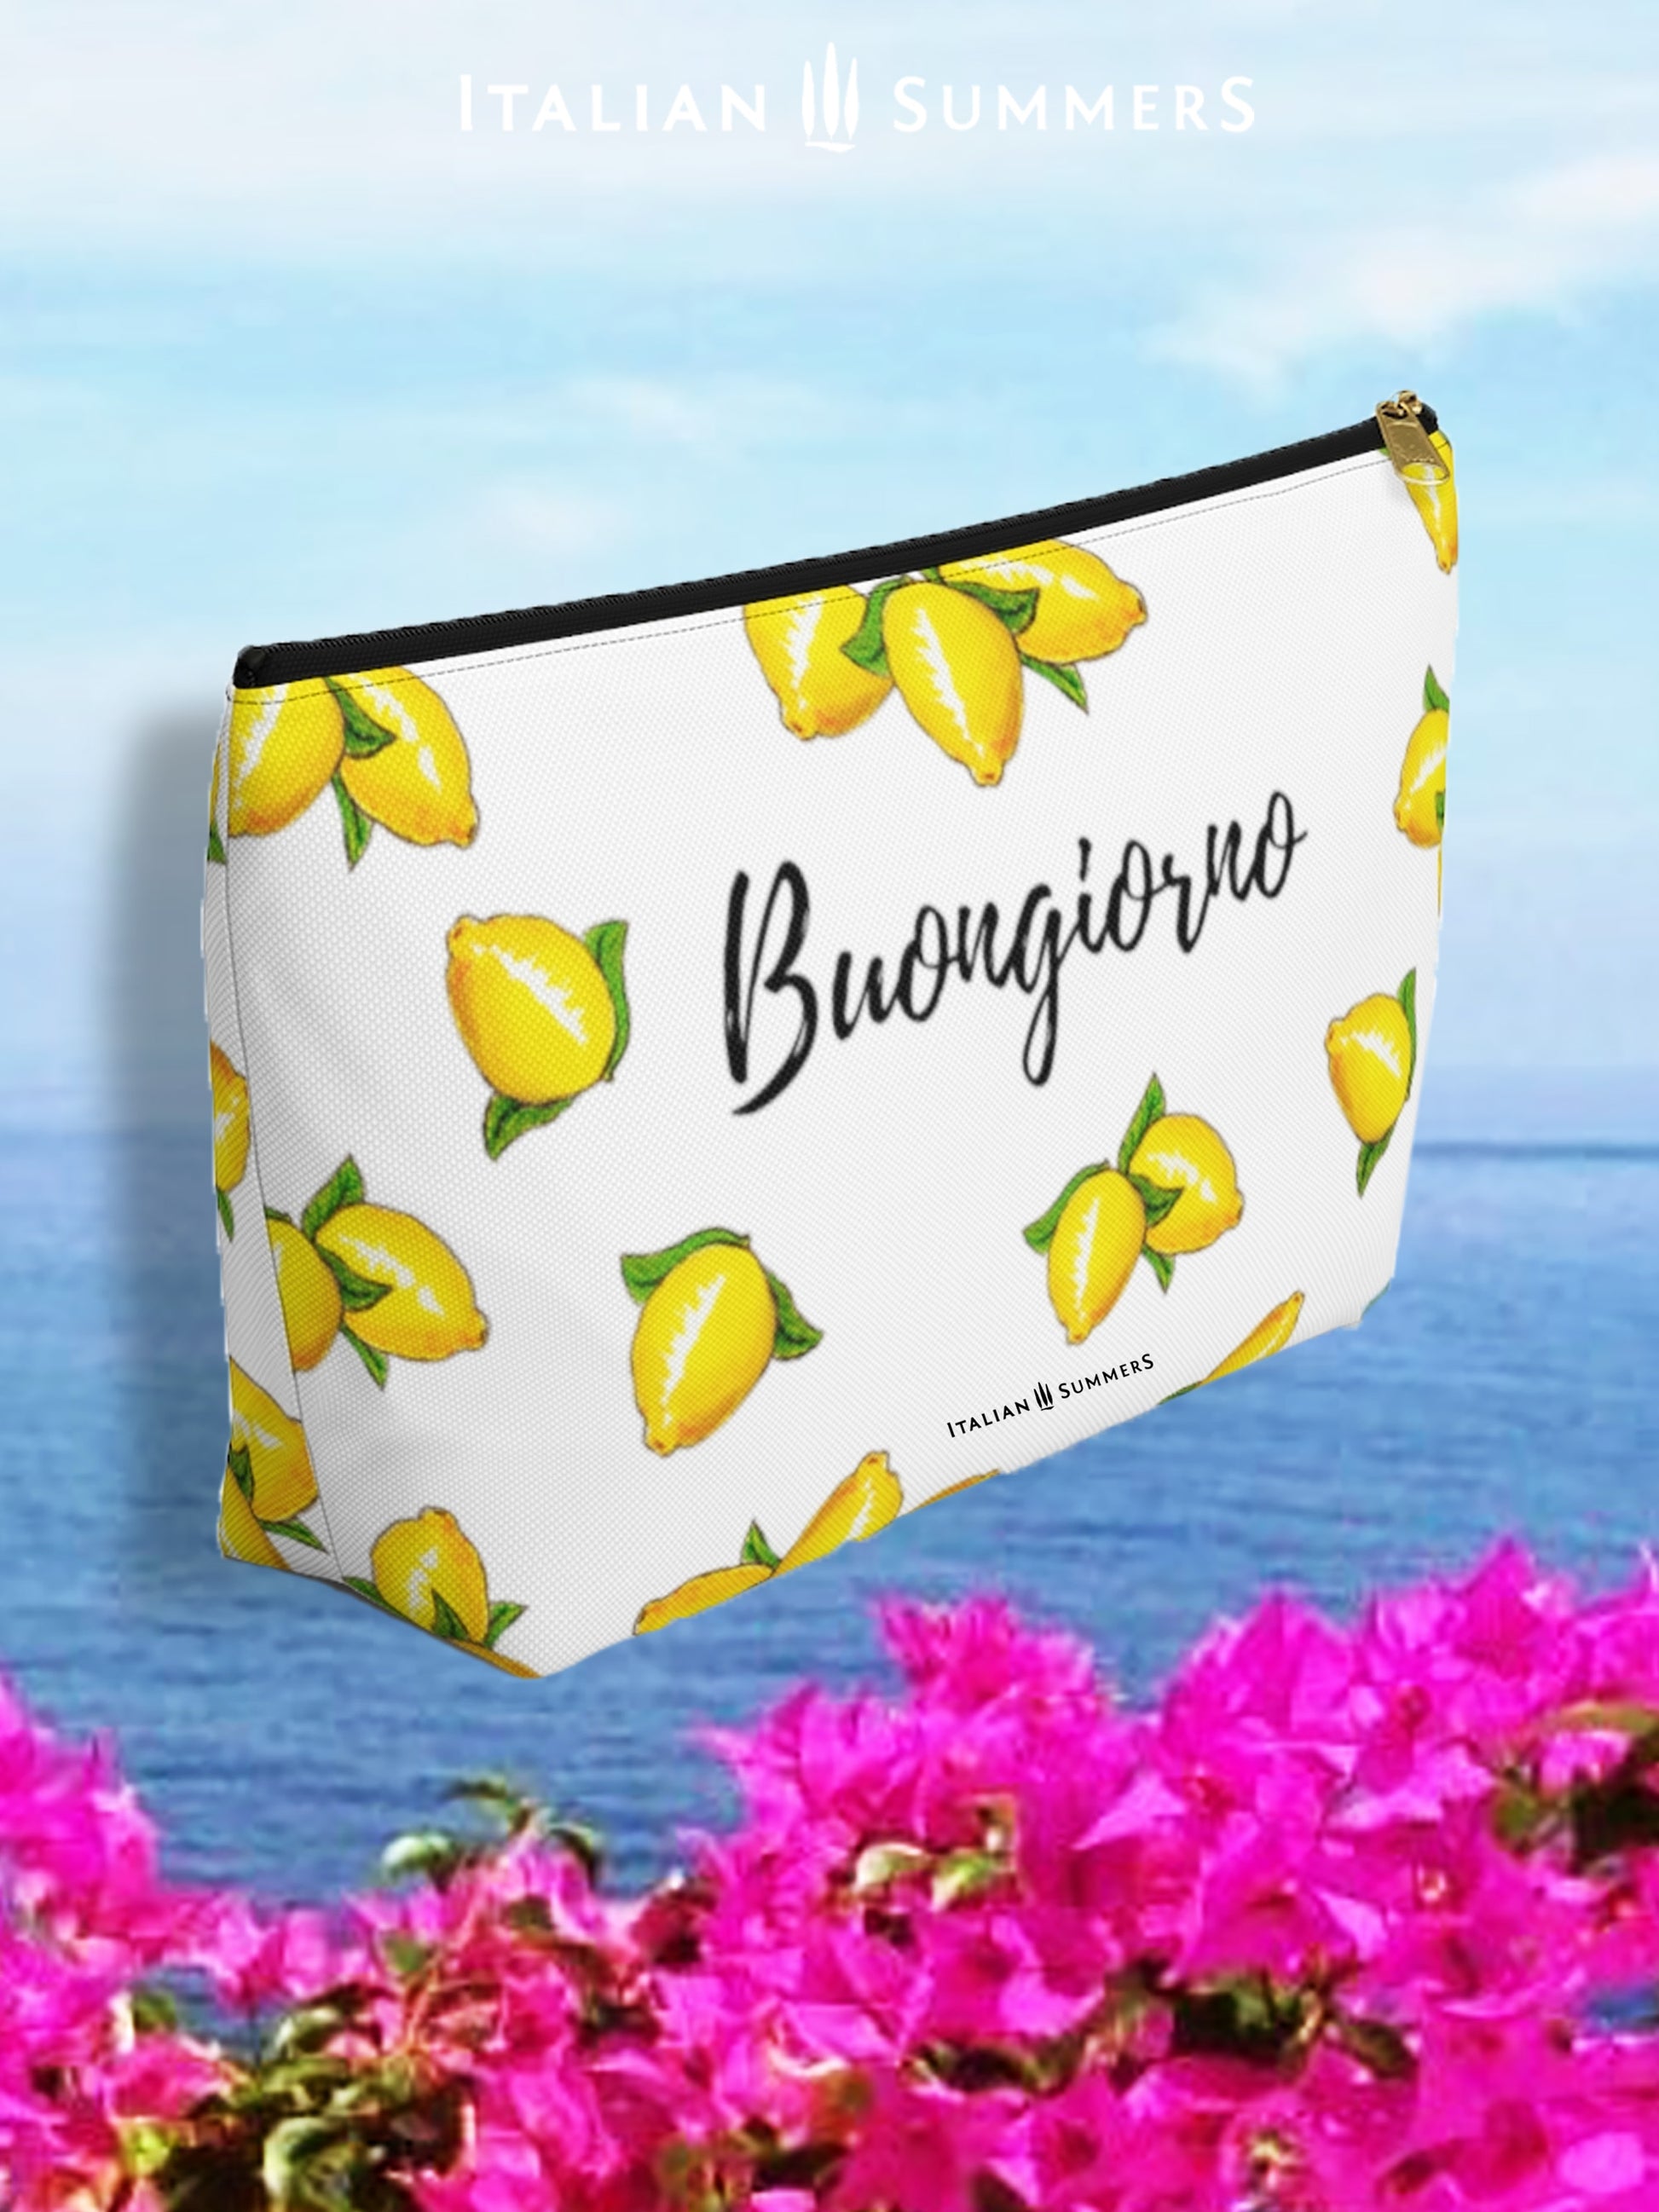 clutch BUONGIORNO LIMONI. Inspired by the sunny, Mediterranean vibes of Italy, this clutch is decorated with playful, happy Sorrento lemons and the classic Italian greeting of "Buongiorno". 